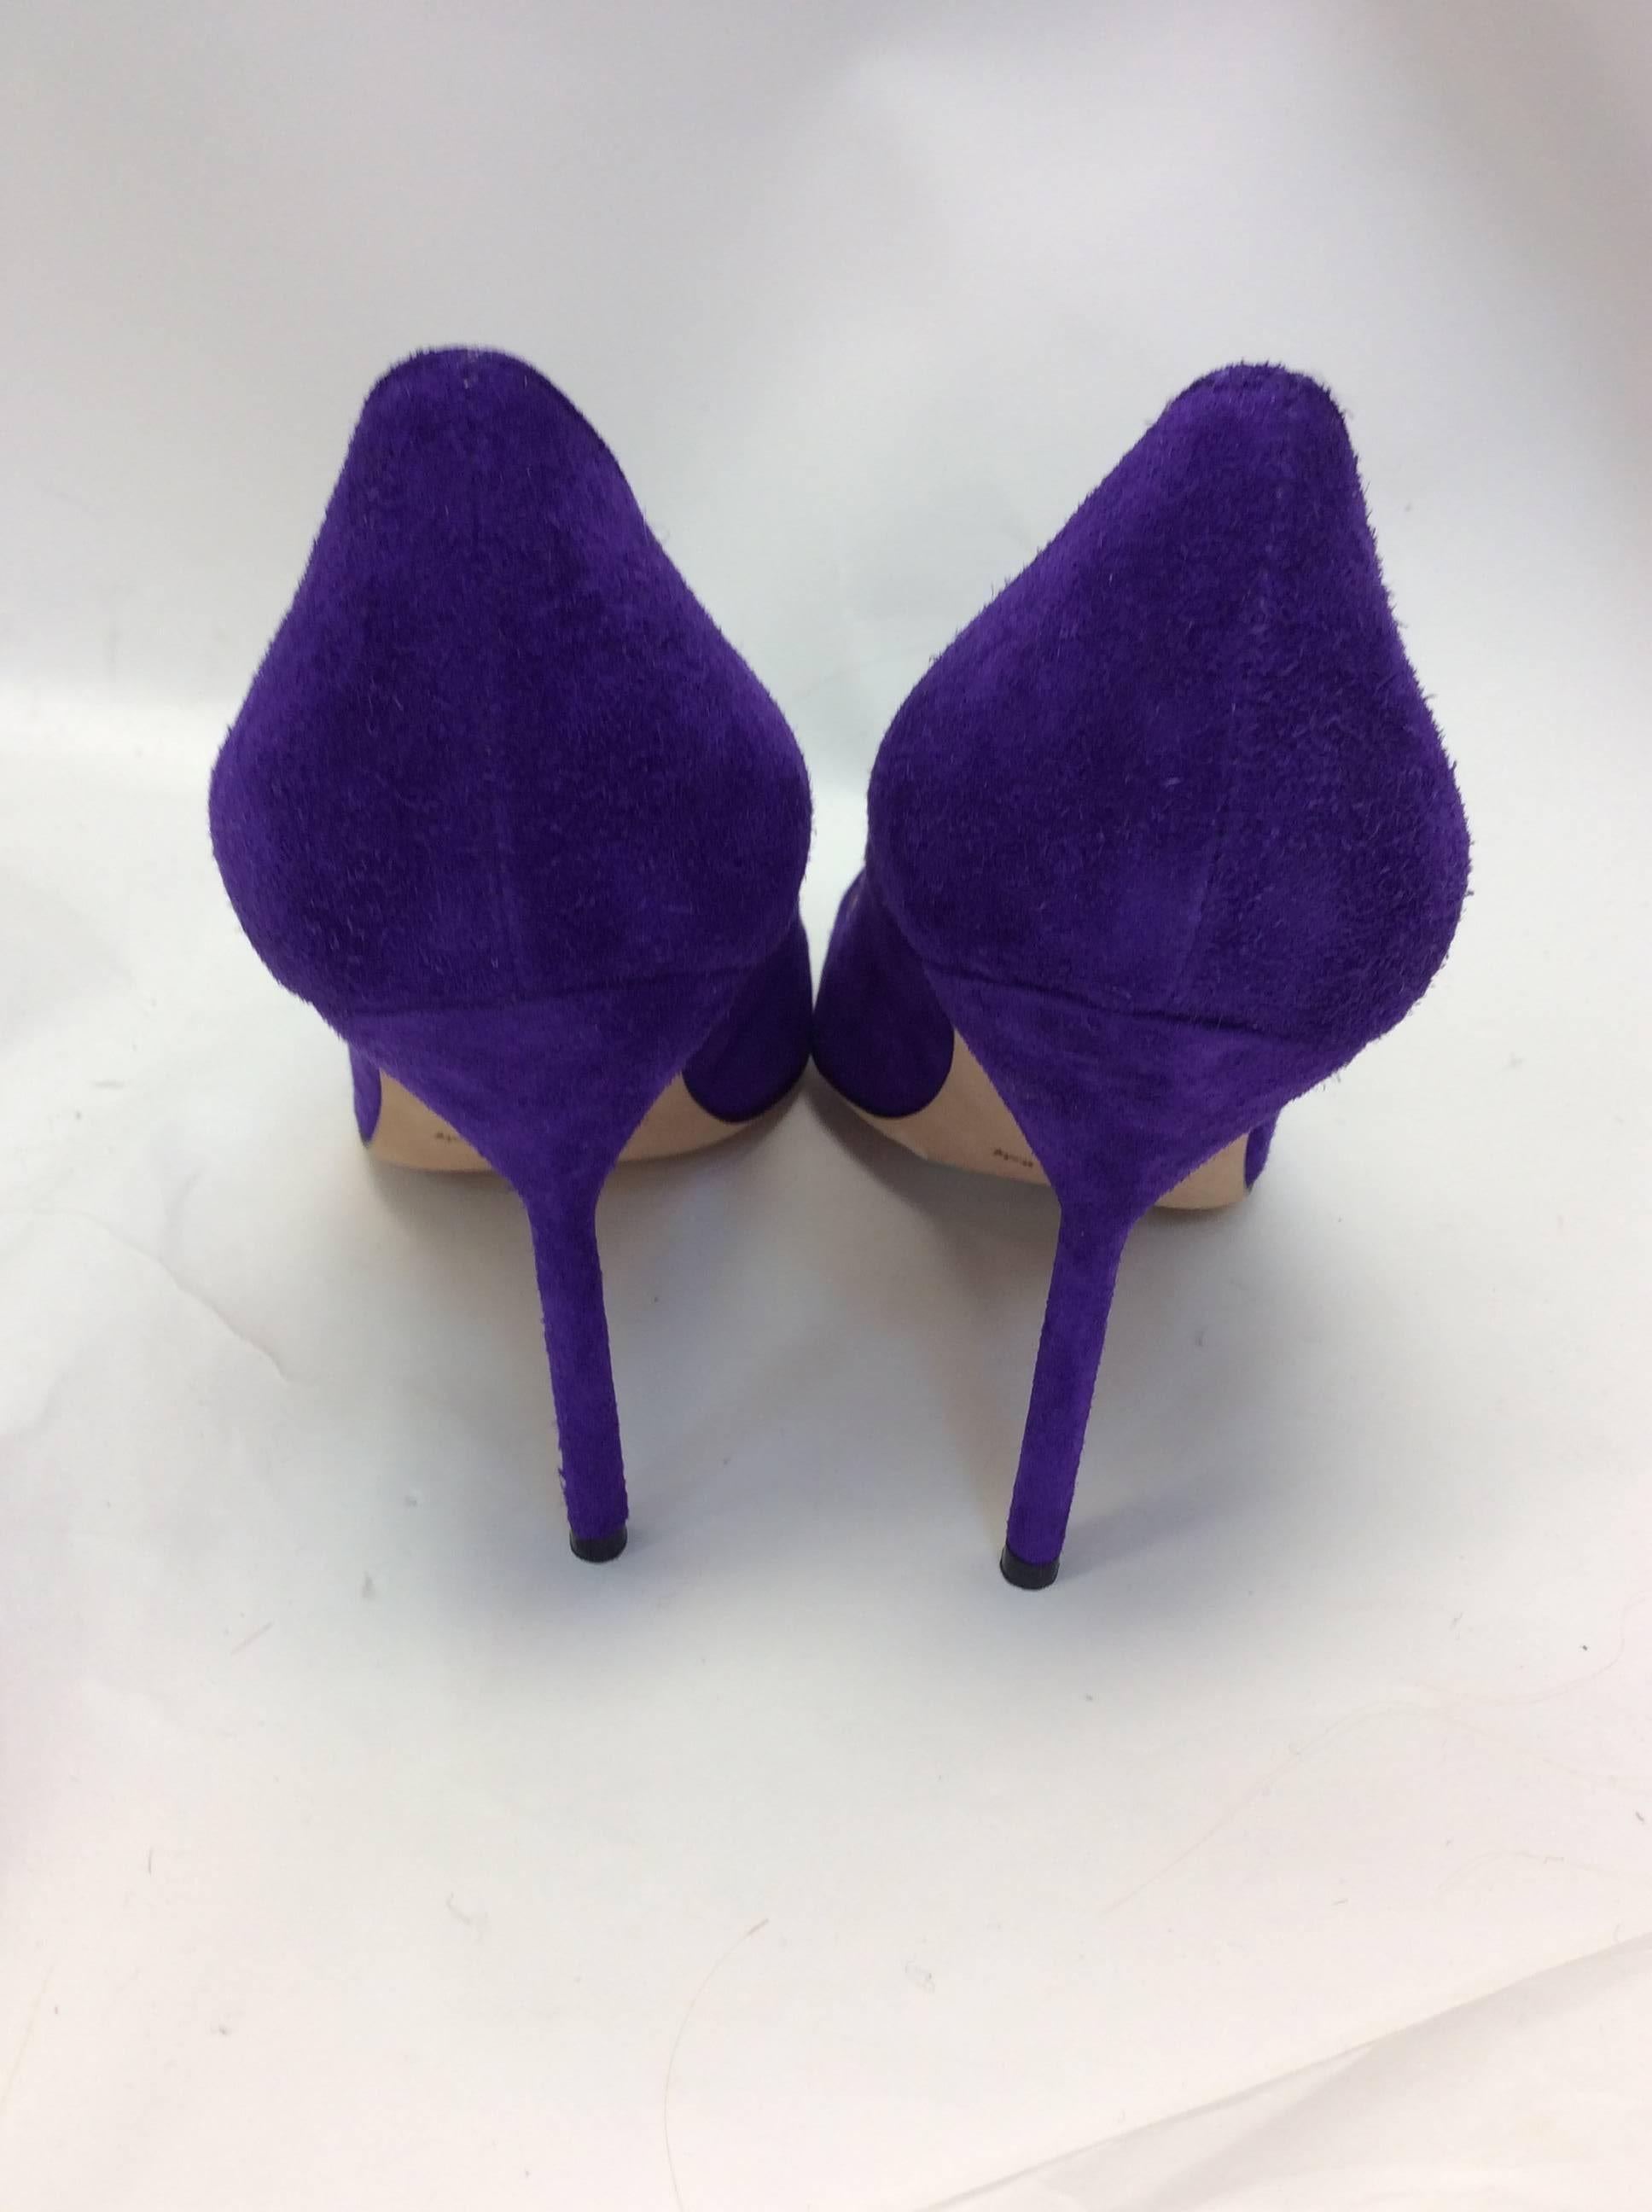 Manolo Blahnick New Purple Suede Pumps In New Condition For Sale In Narberth, PA